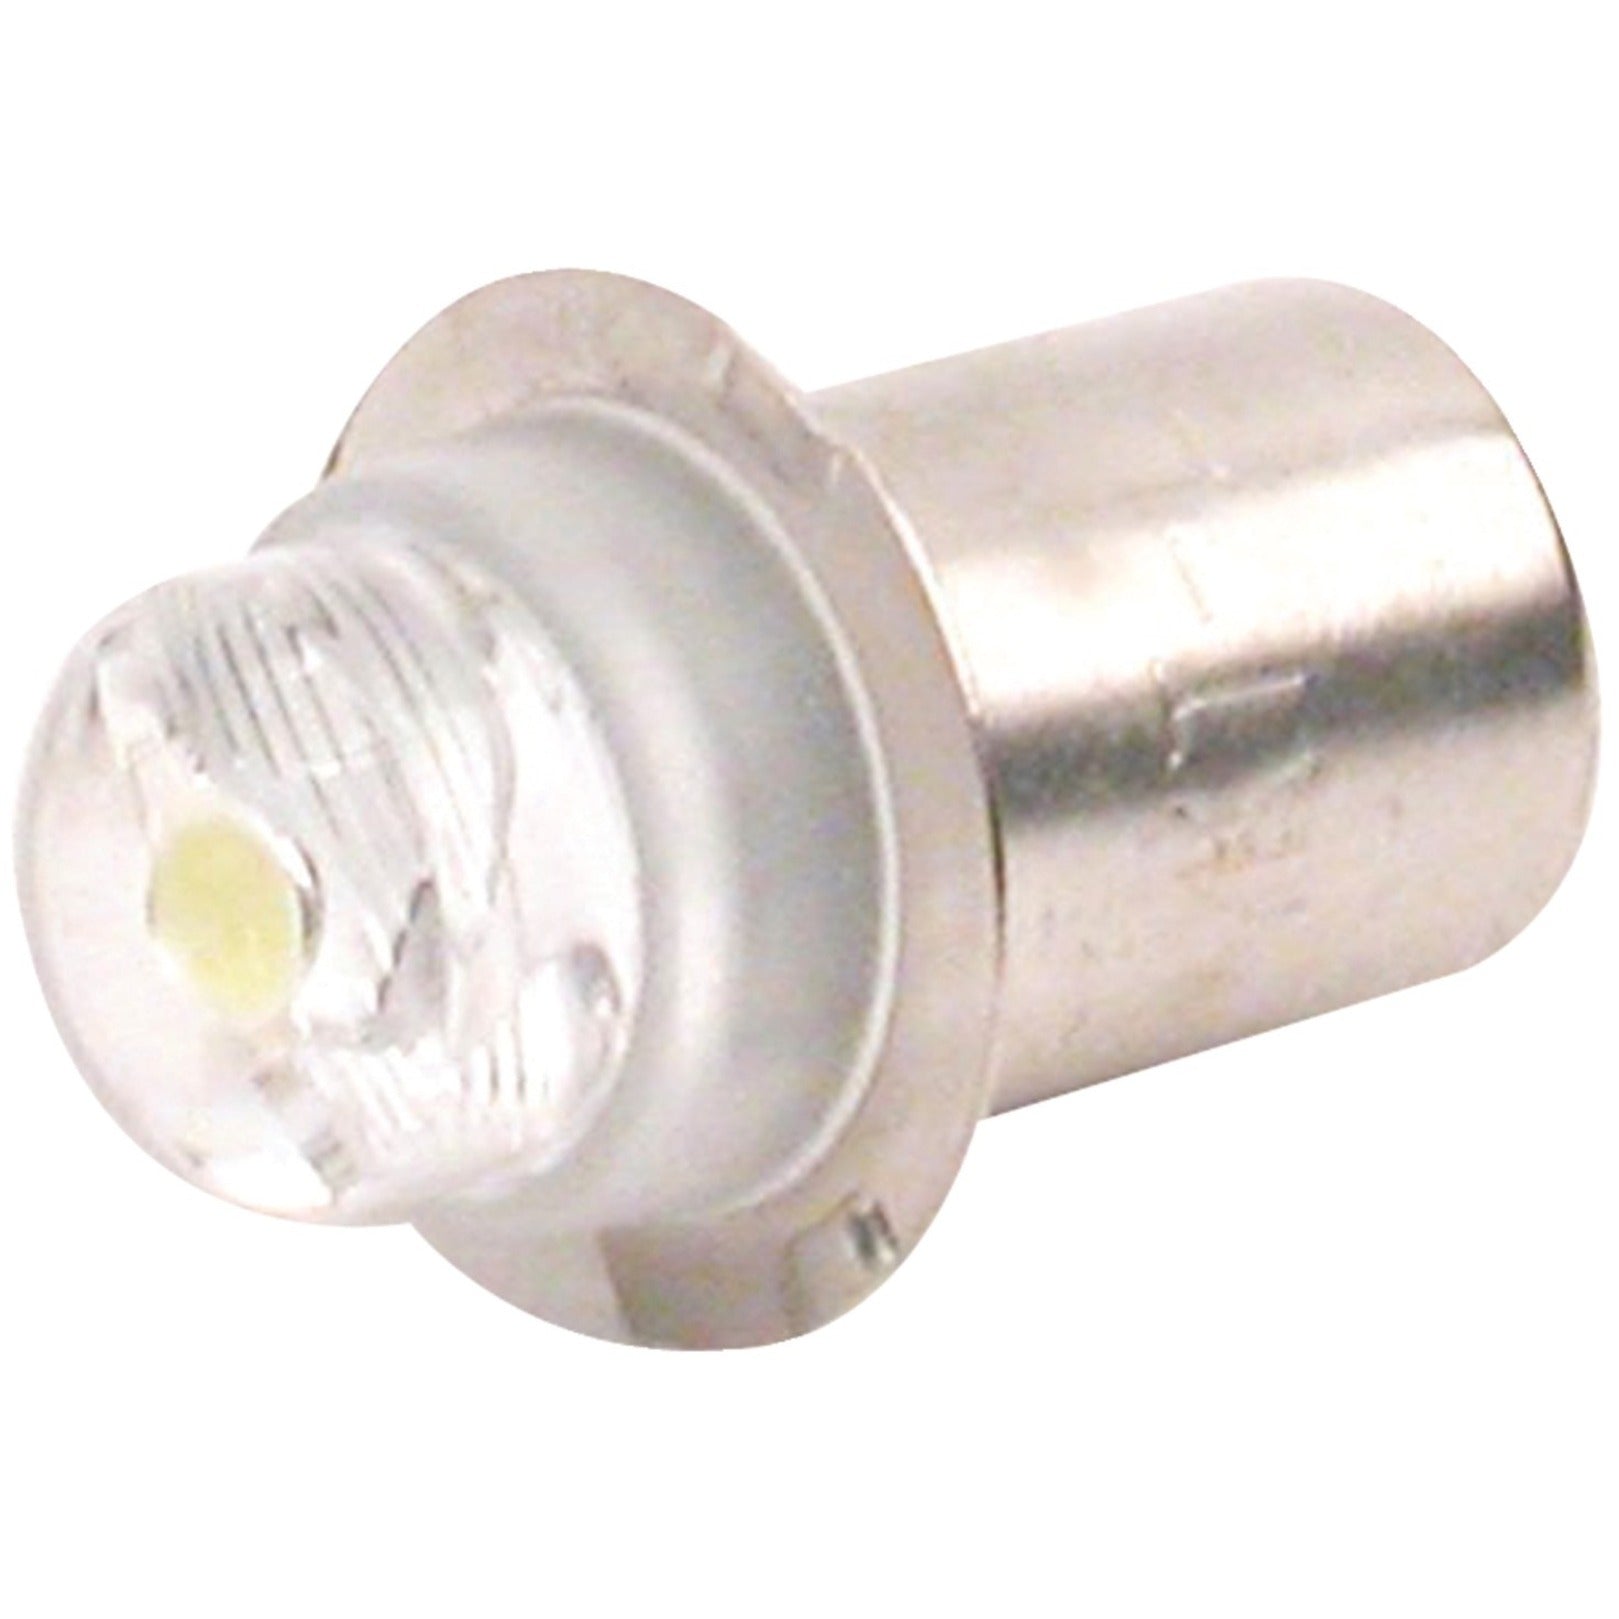 Dorcy 41-1643 LED Replacement Light Bulb, 10 Year Bulb, 100000 Hour Life